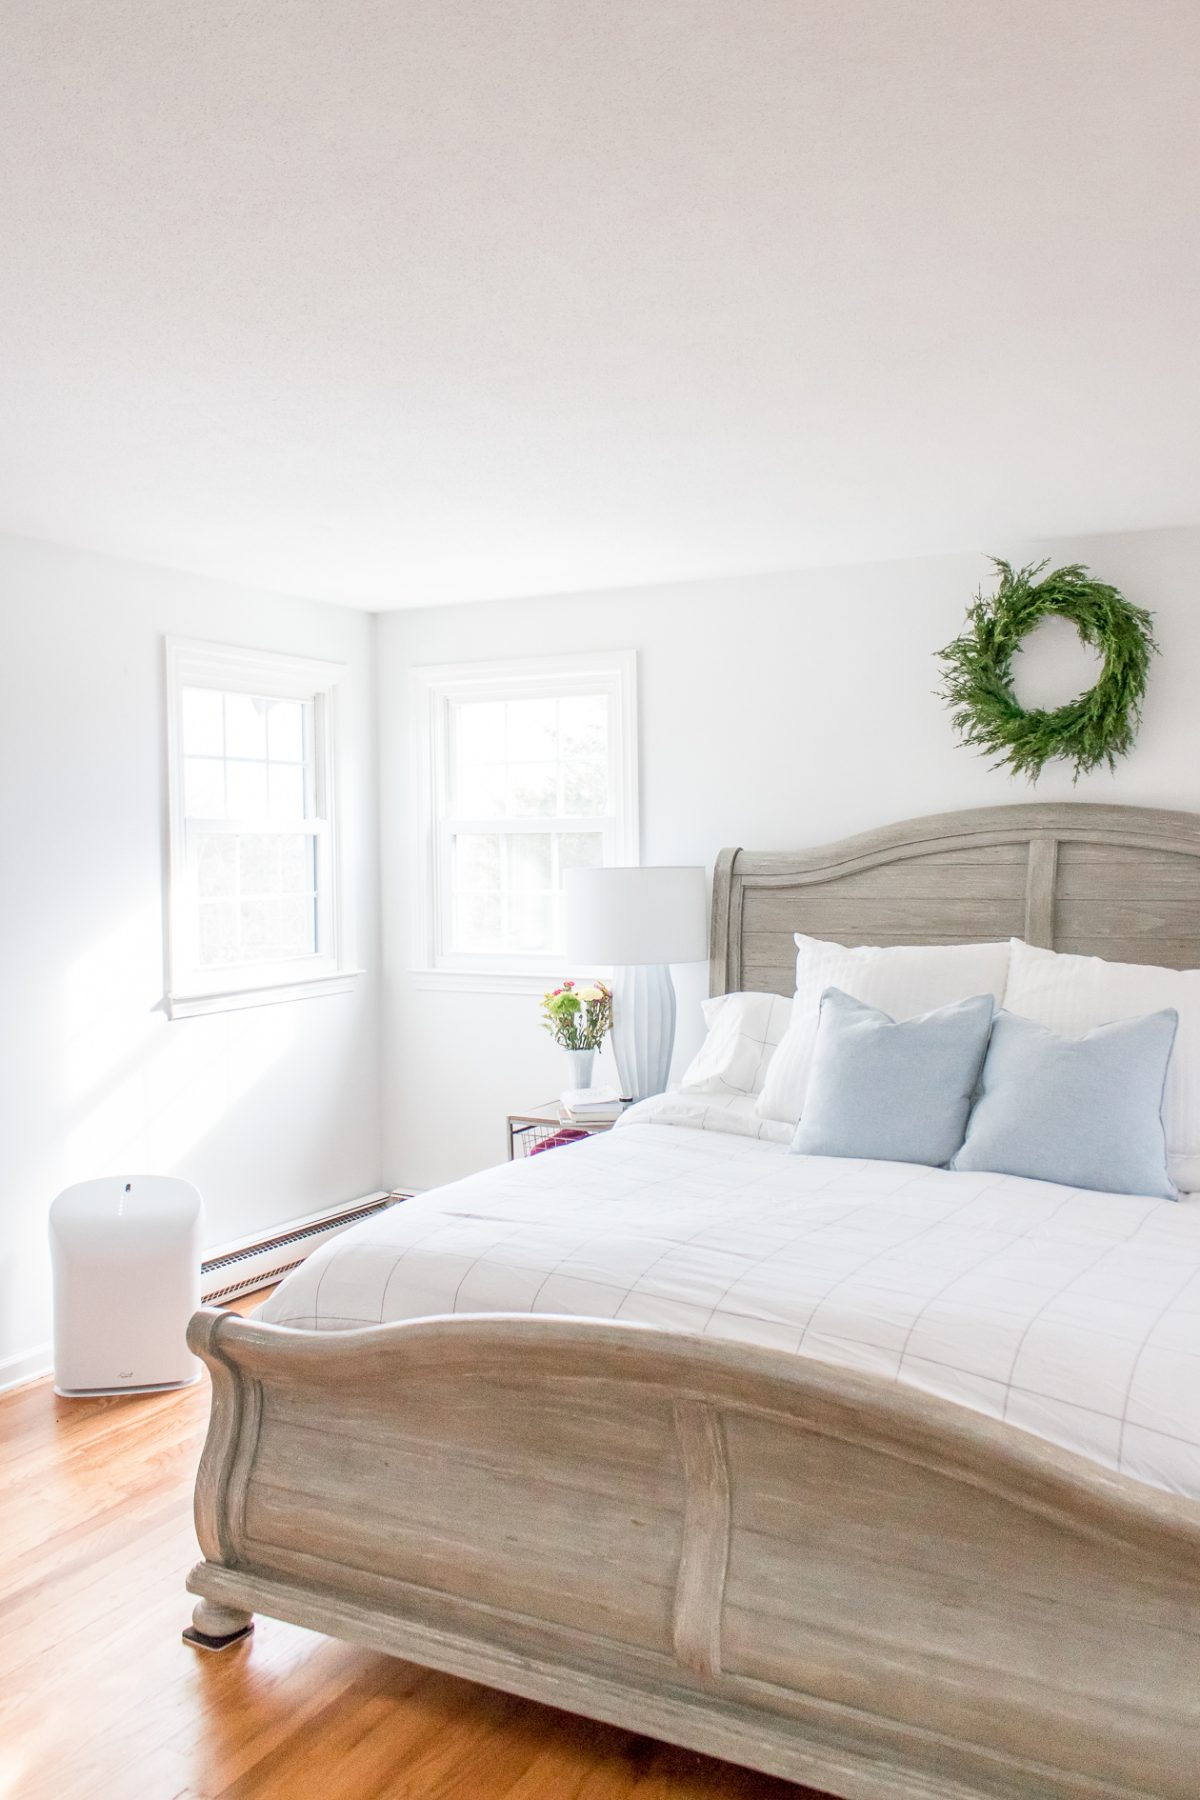 Bright White Bedroom with Gray Headboard and Green Boxwood Wreath on the Wall above the Bed and Rabbit Air Purifier near the wall in the room